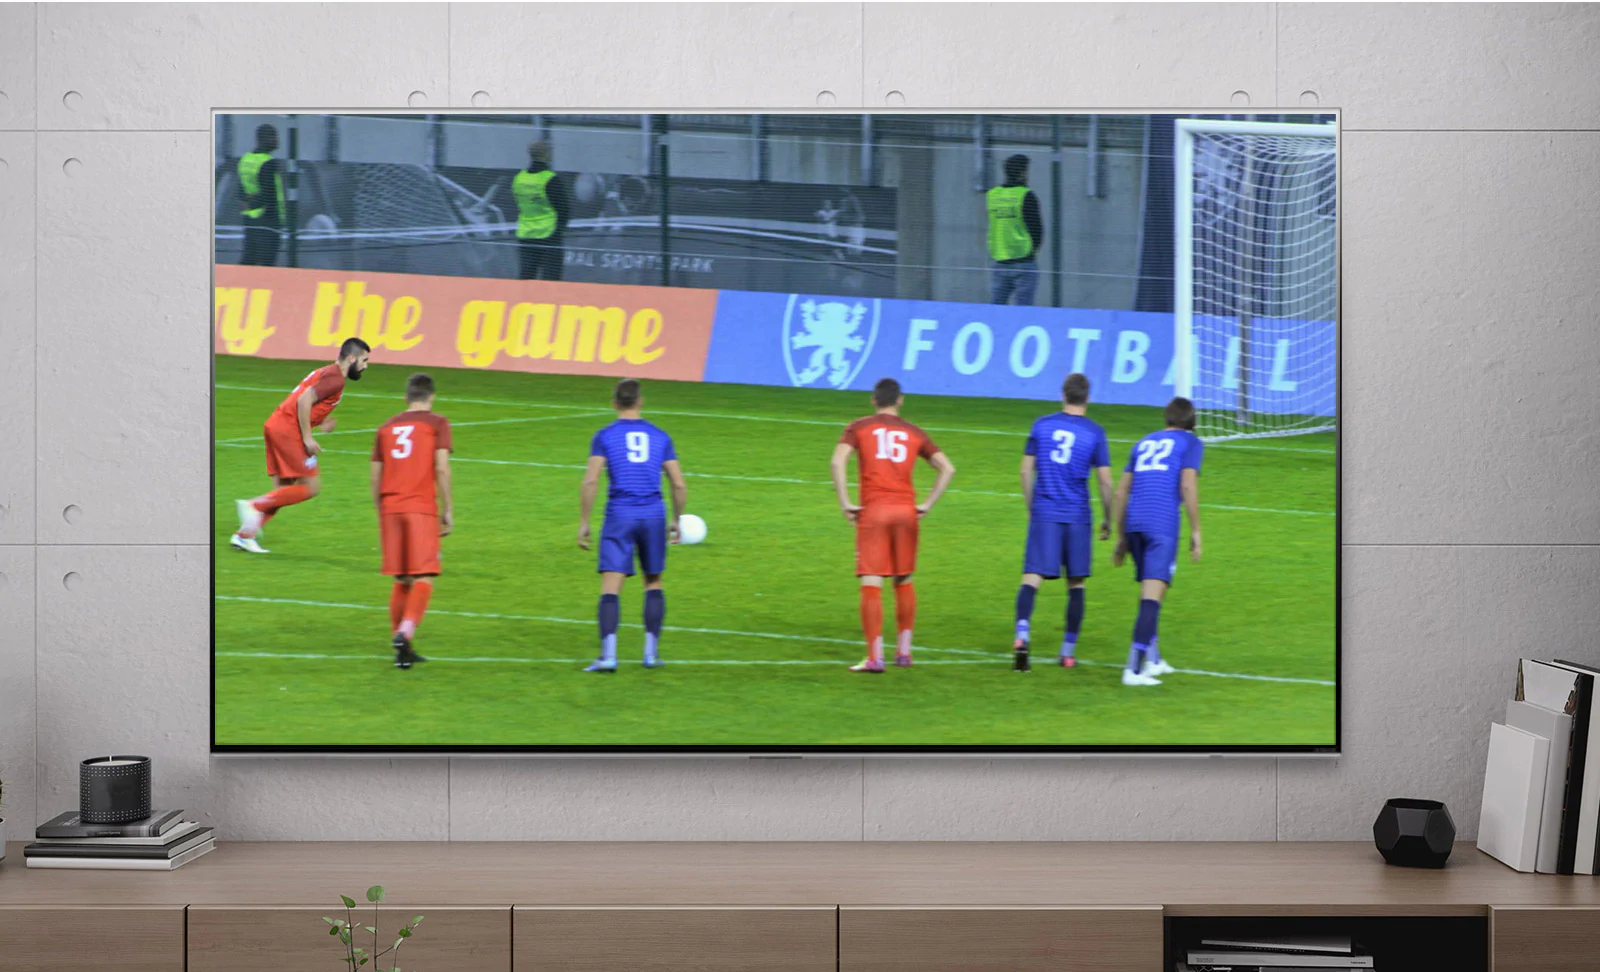 TV screen showing a player scoring a penalty goal (video viewing).